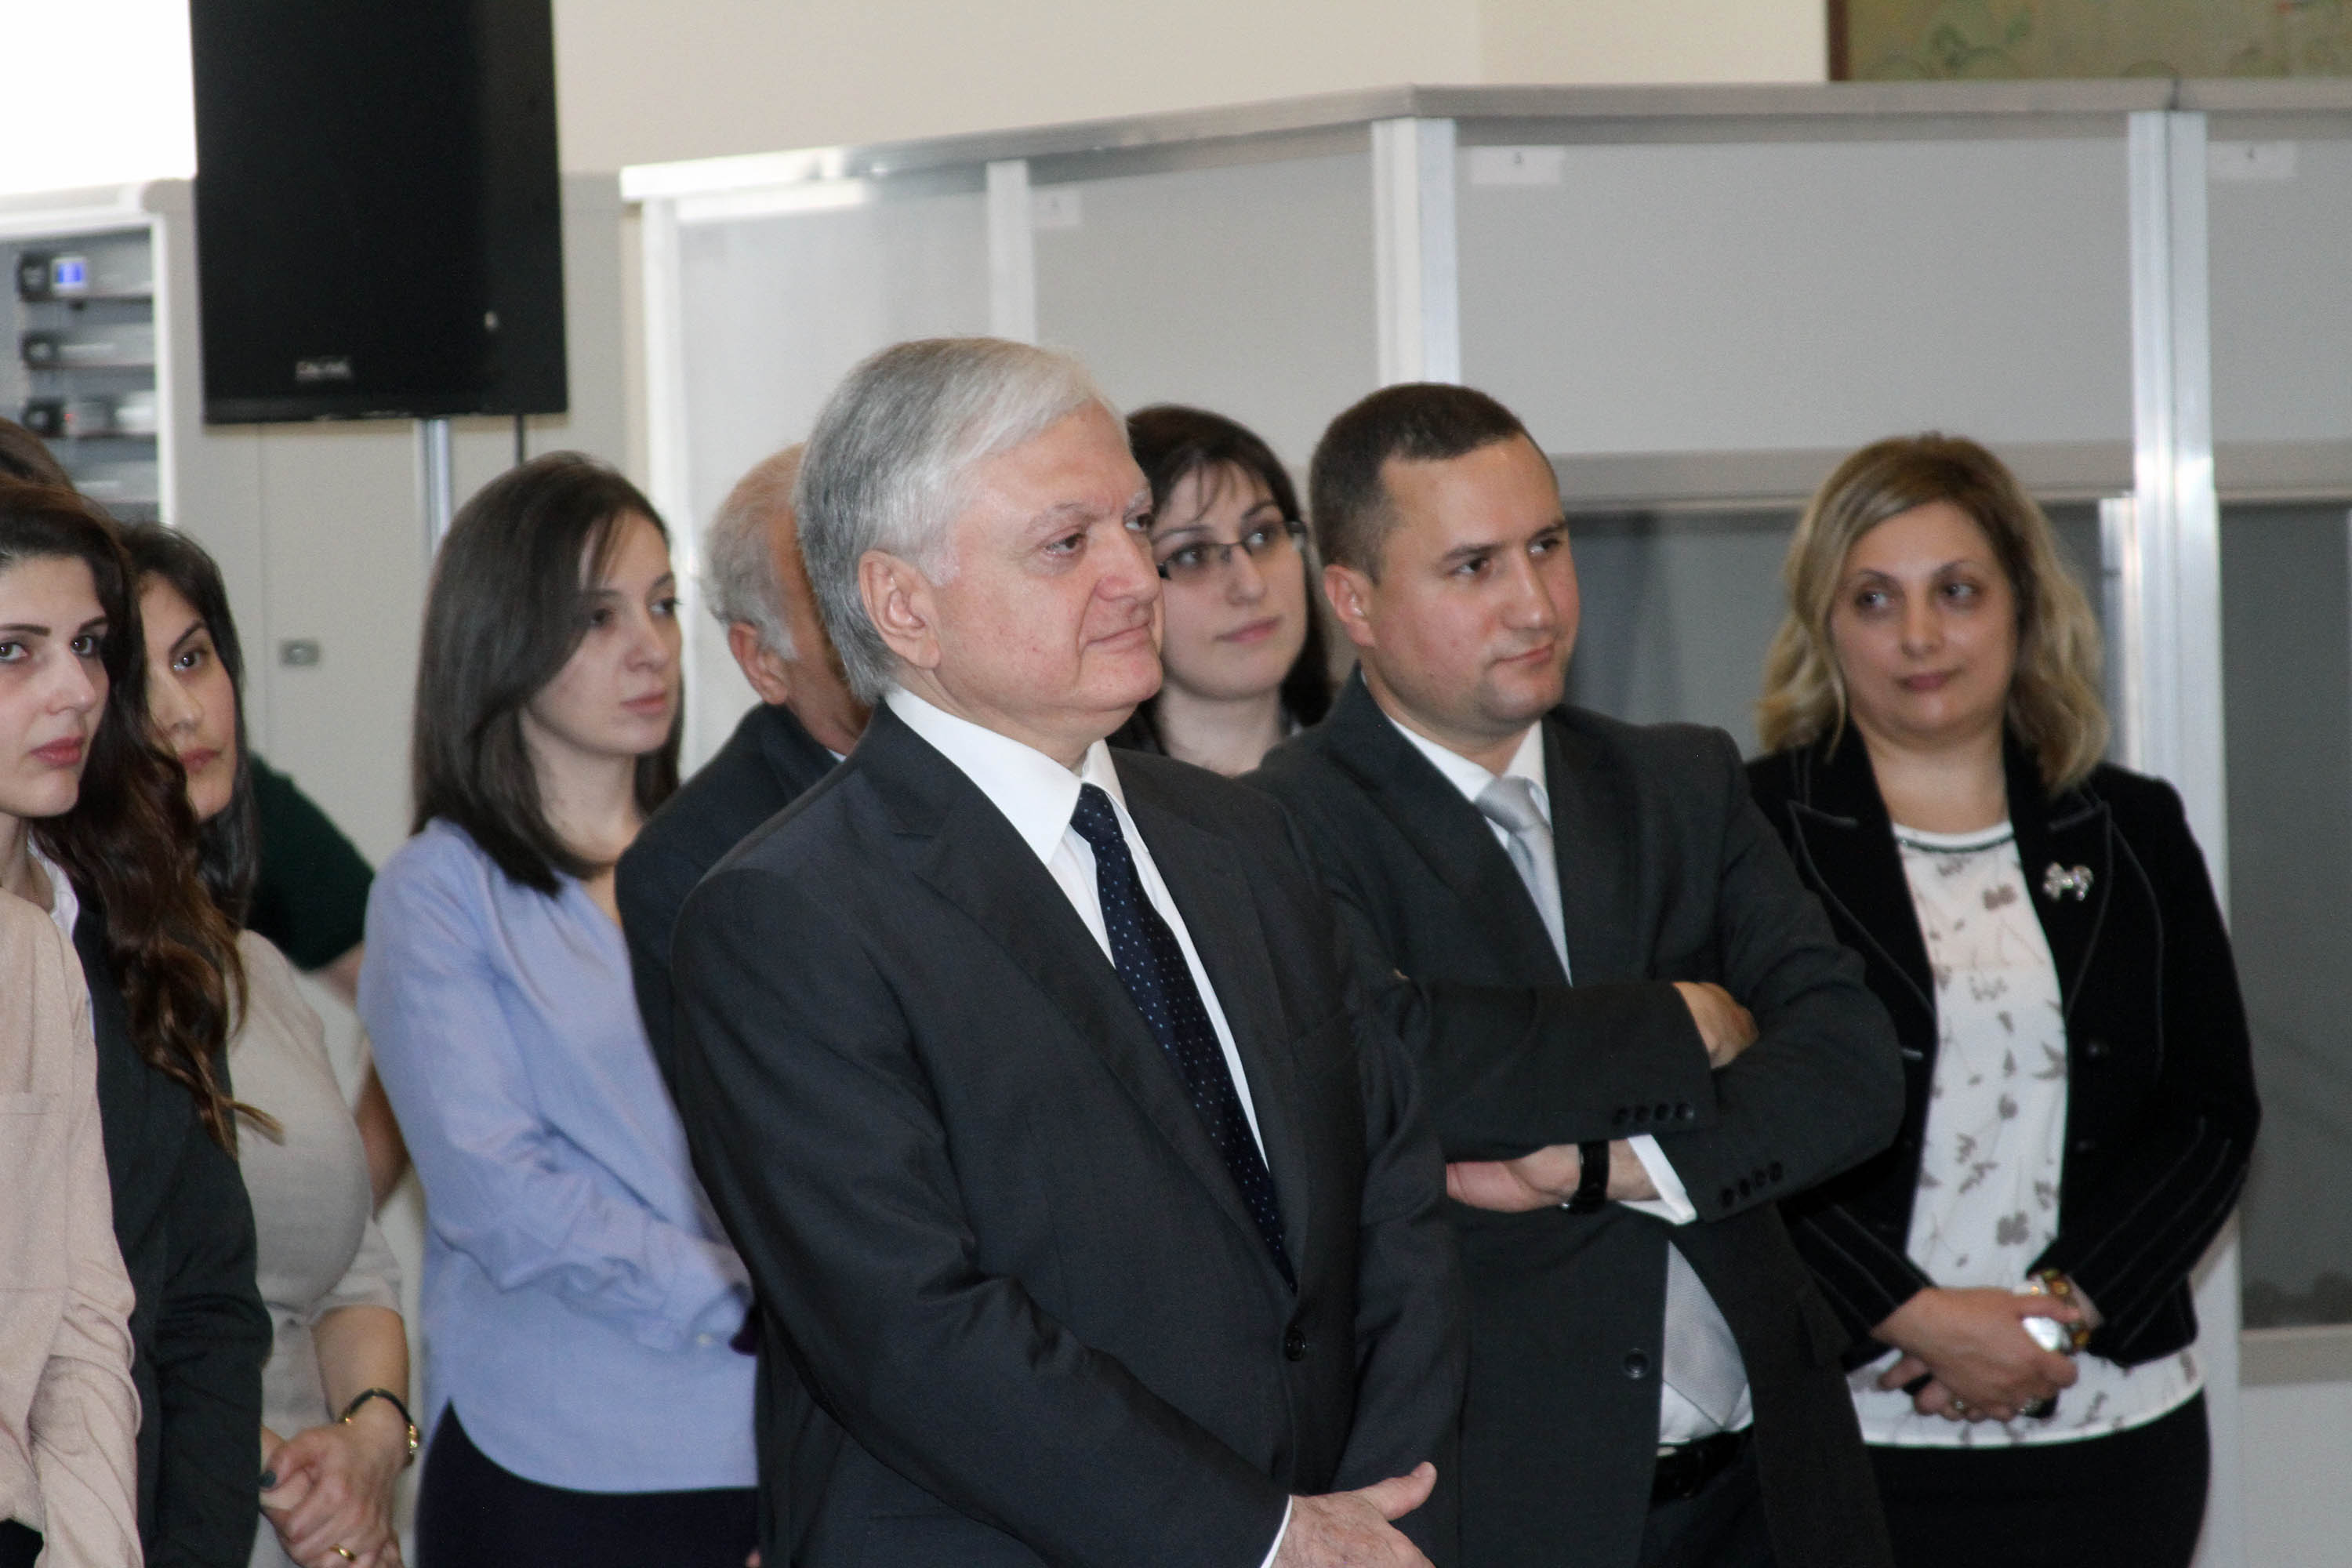 Remarks by Edward Nalbandian, Minister of Foreign Affairs of Armenia, on the occasion of completing his tenure addressed to the diplomats of Armenia